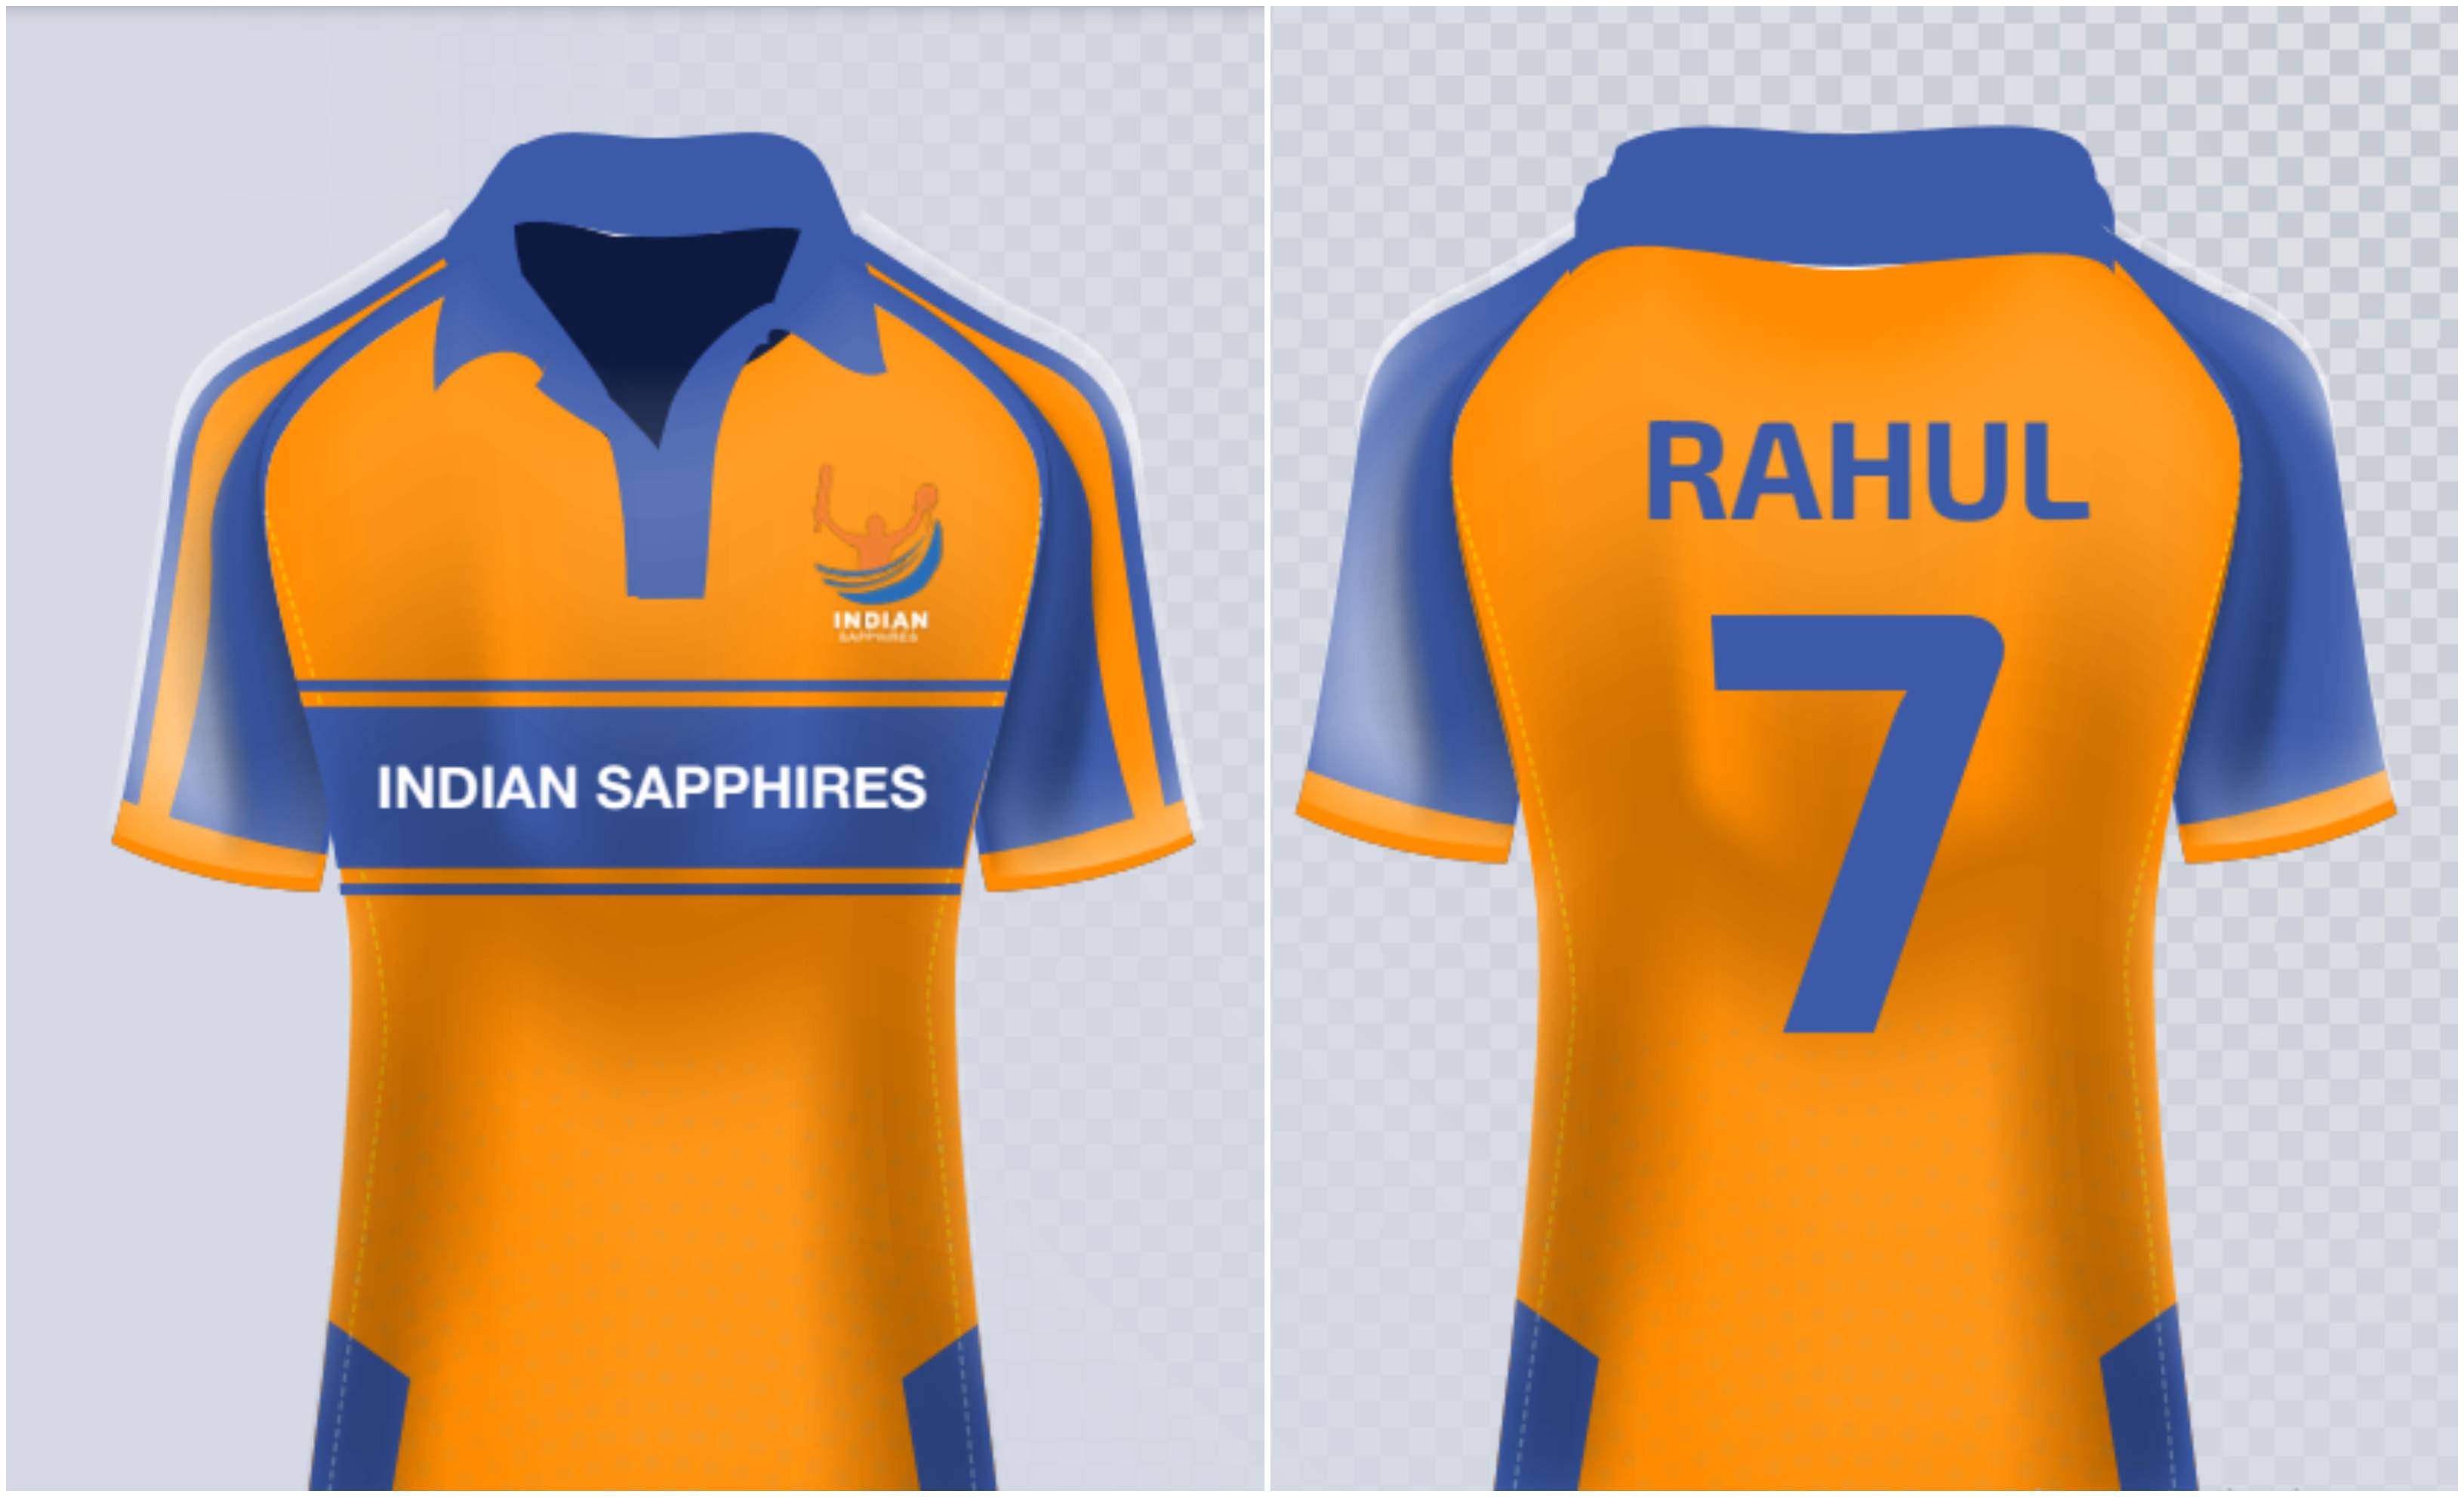 The jersey of GPCL team Indian Sapphires